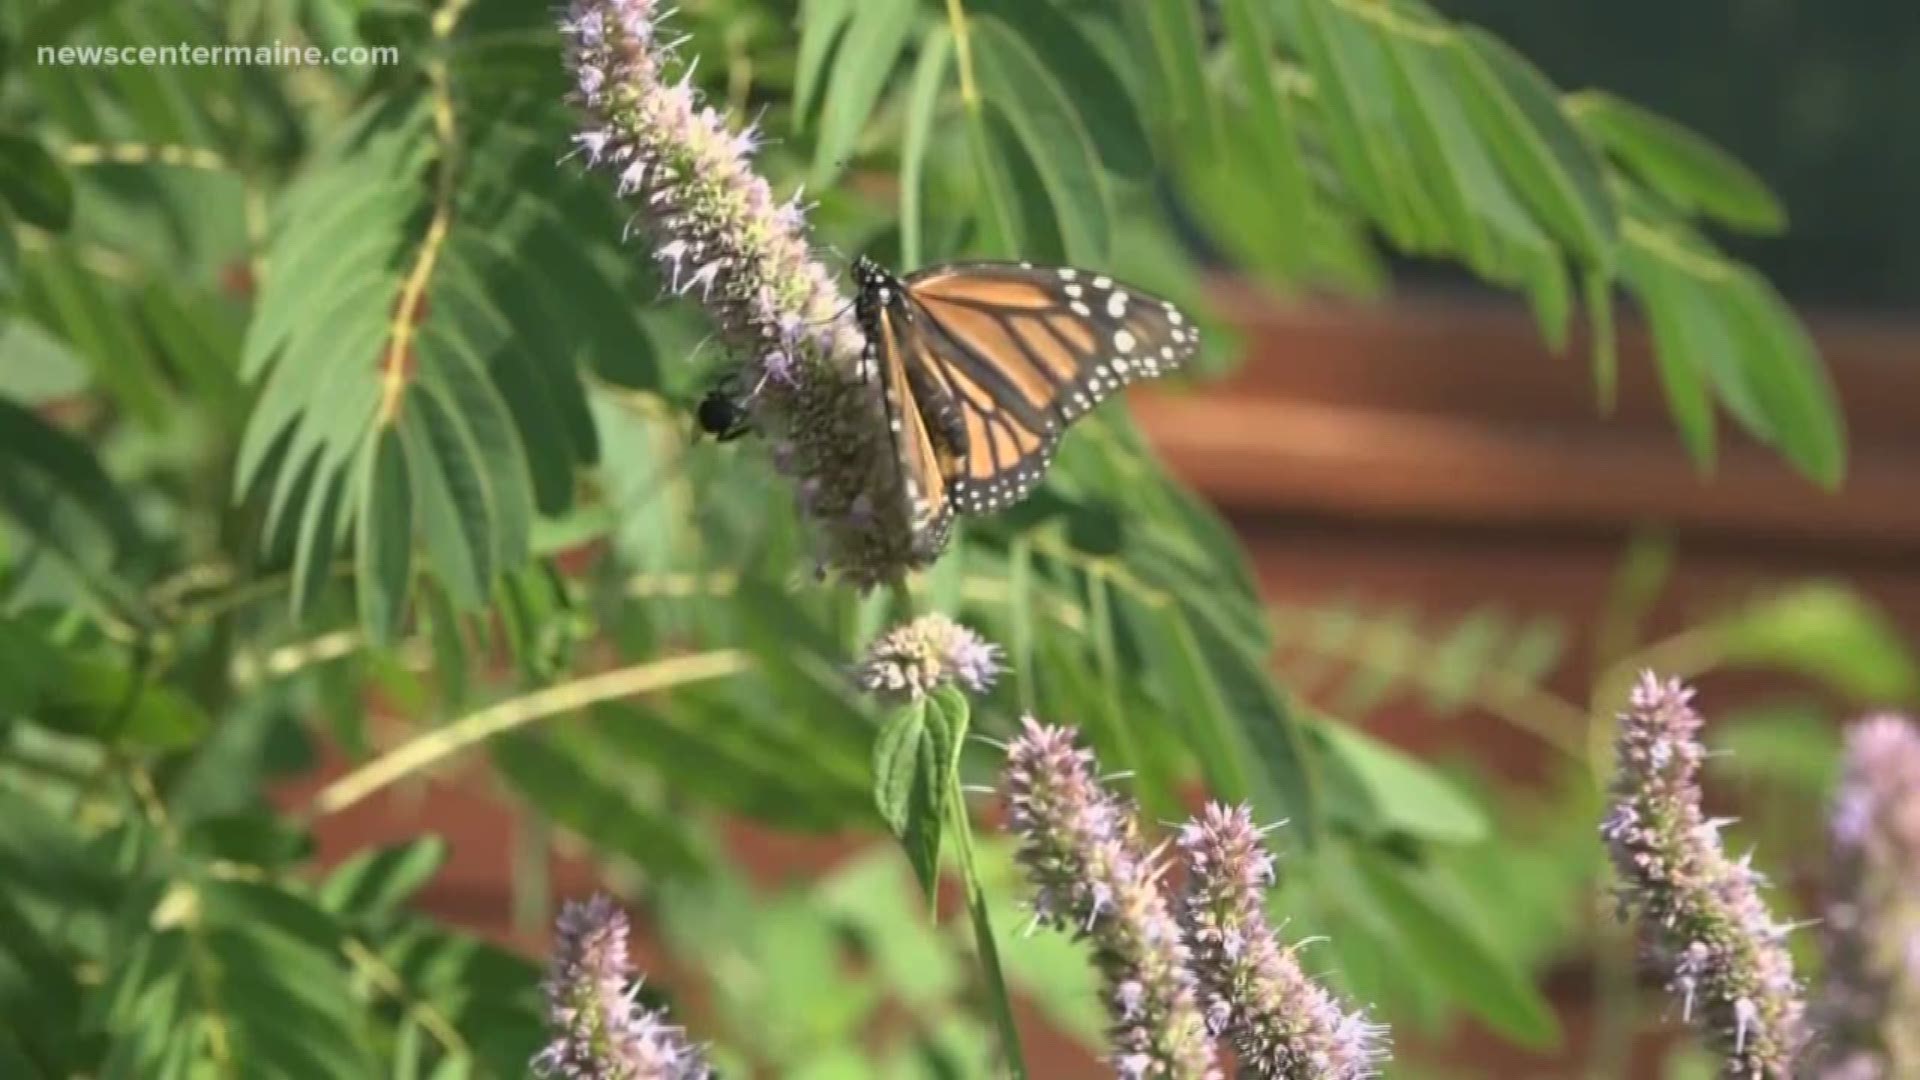 UMaine needs help with butterfly research and Sue Bonzey of Dedham shared a really interesting video of a caterpillar spinning itself into a cocoon.